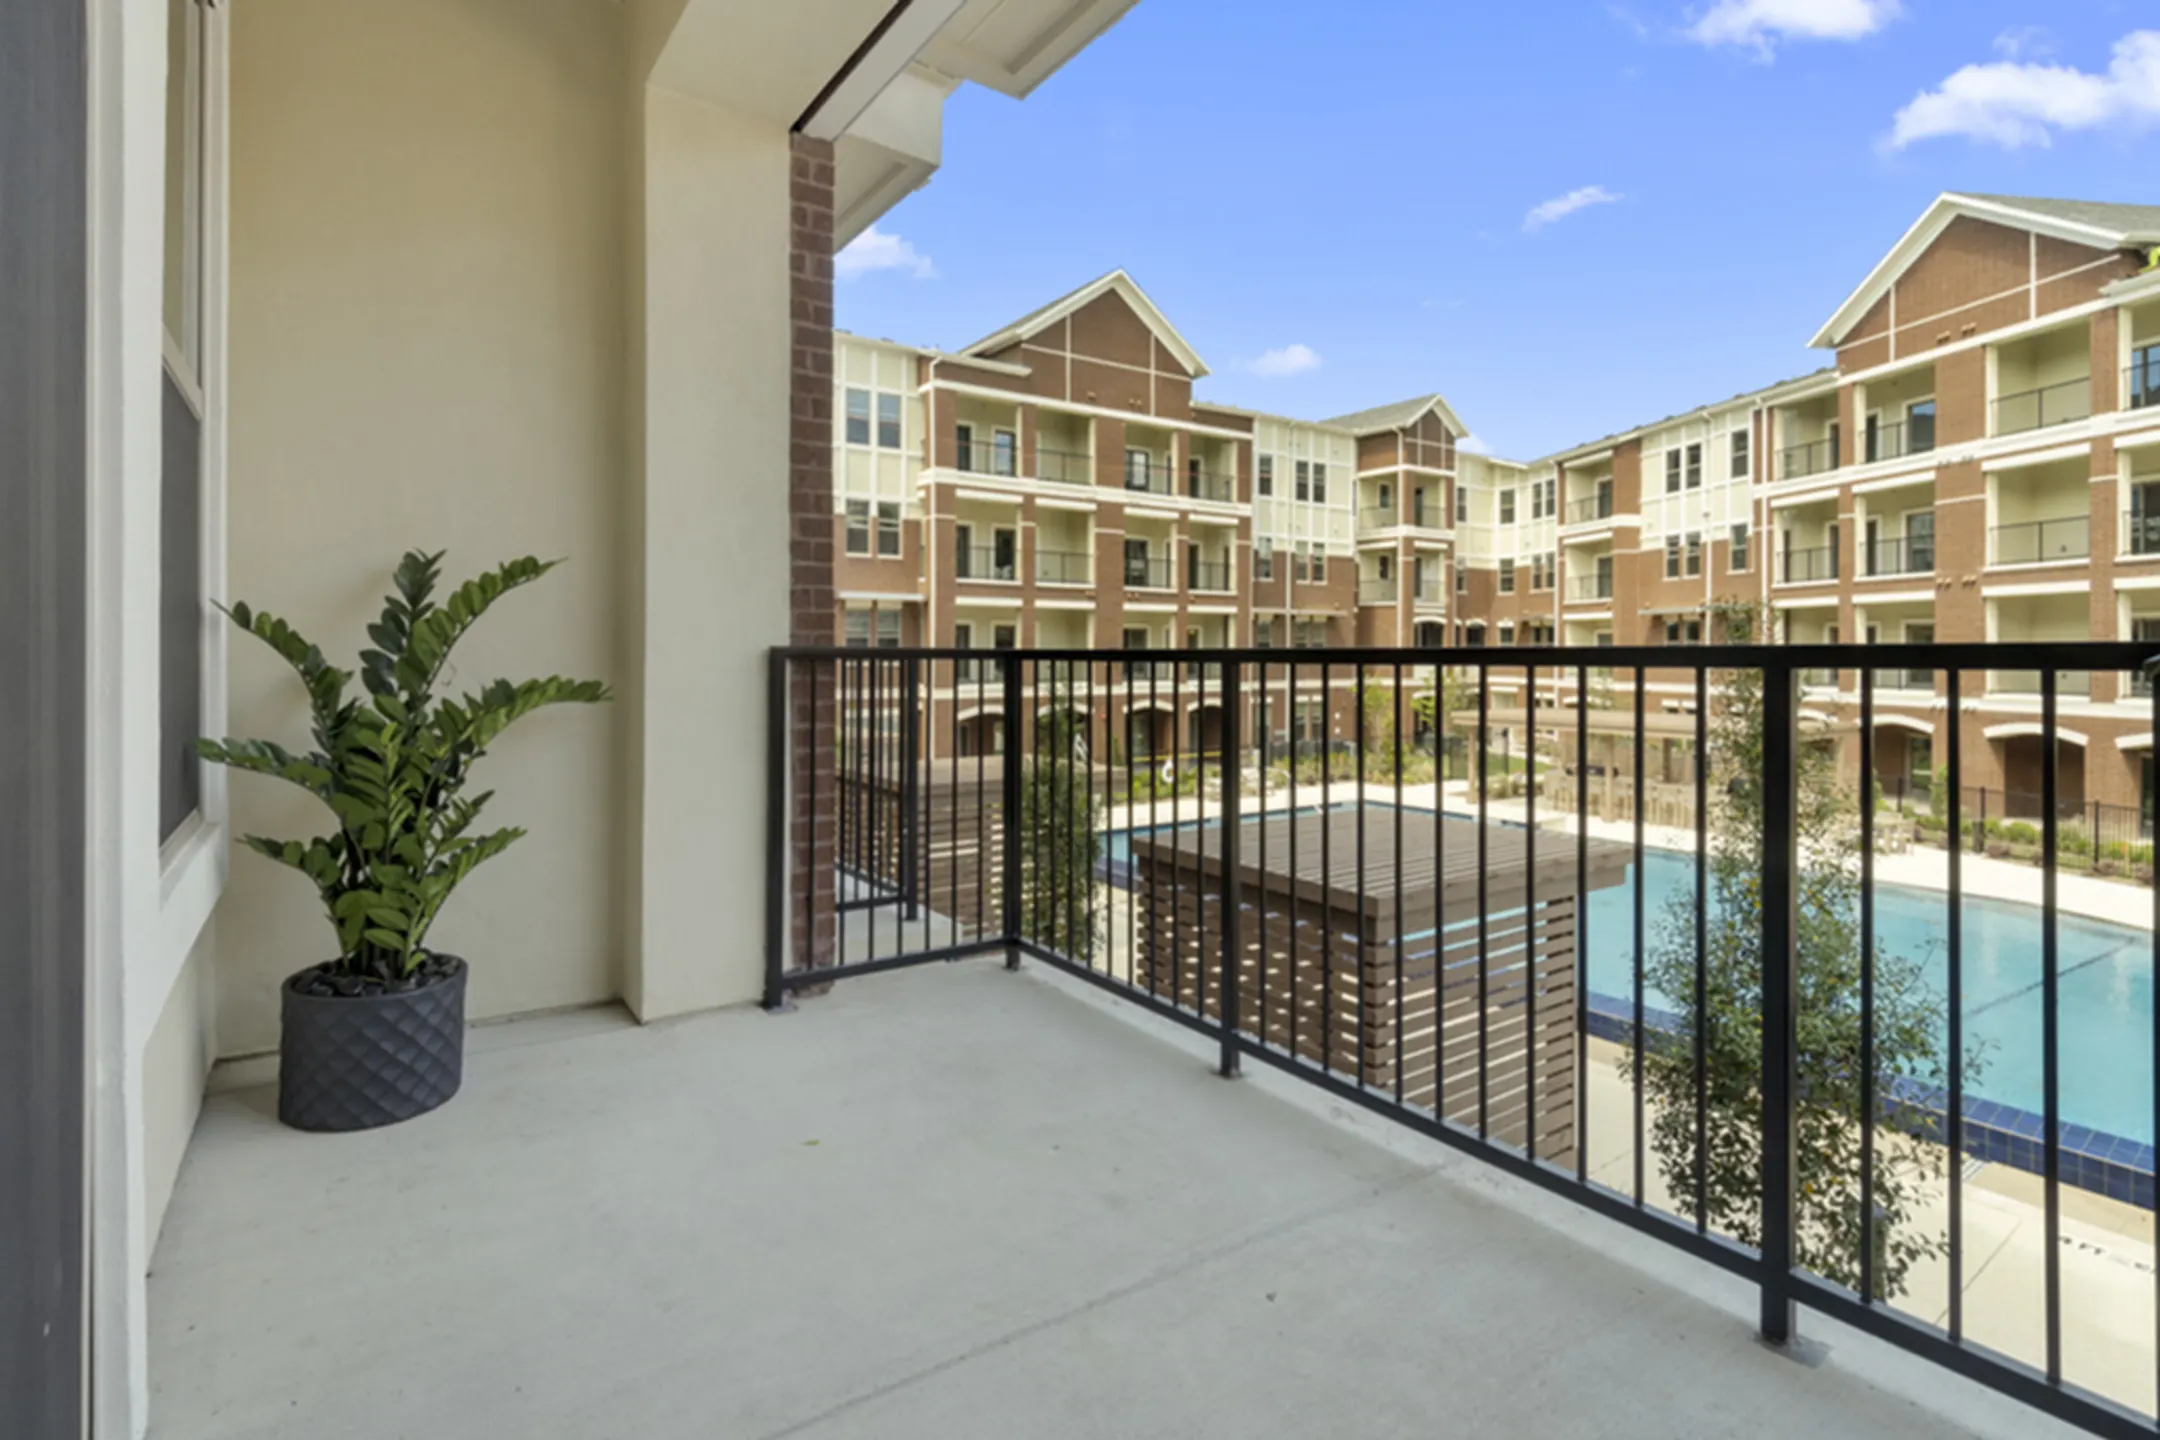 The Mansions at Mercer Crossing - Farmers Branch, TX